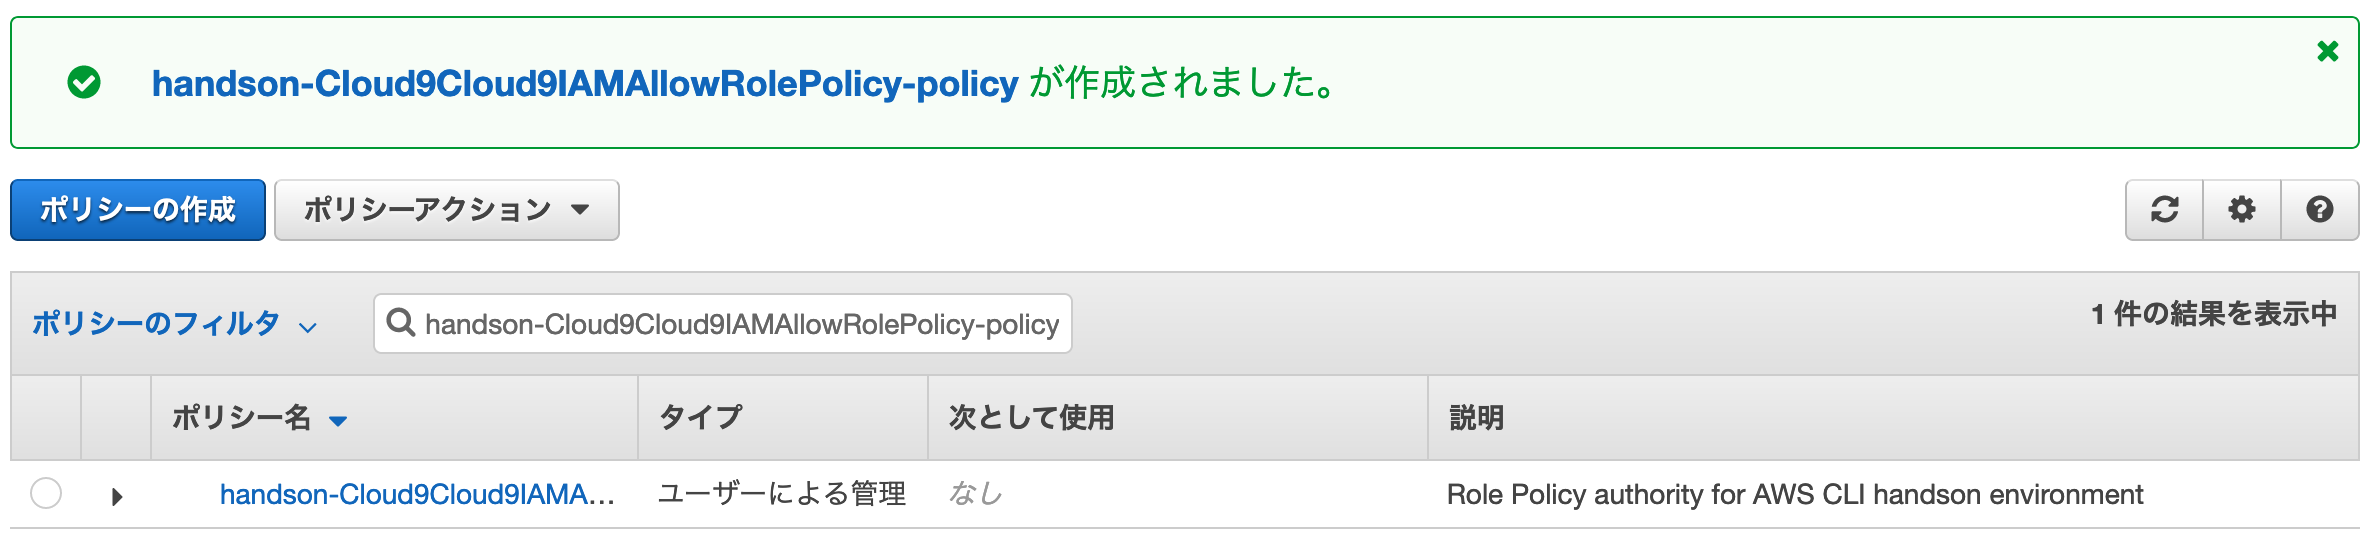 _images/_result-handson-Cloud9IAMAllowRolePolicy.png